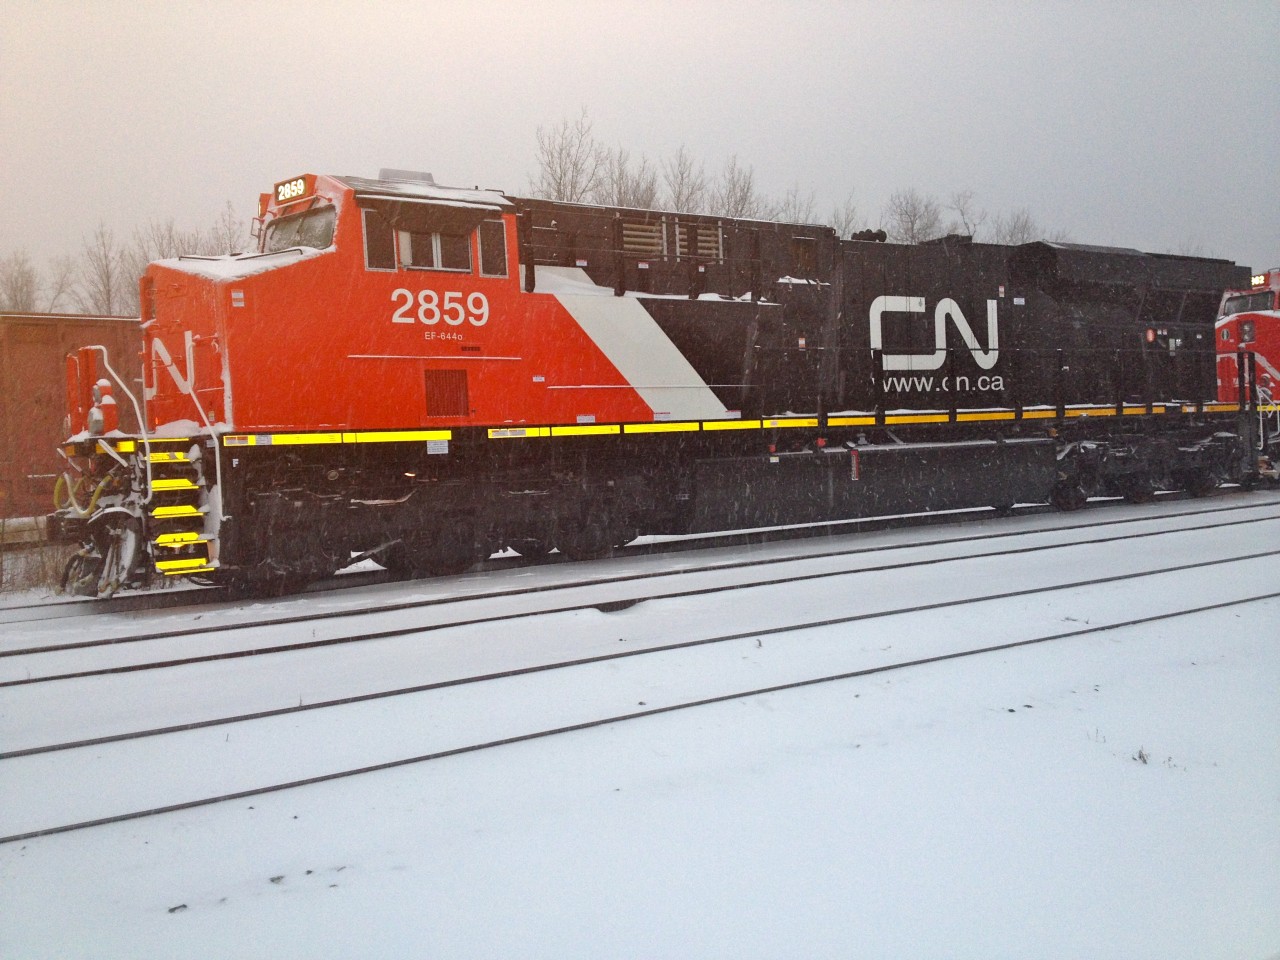 Brand spanking new CN ES44AC's 2859,2862,2861 being delivered by NS train 369 at Ft. Erie Ont in the middle of the first snowstorm of the season. These units will be lifted for Mac Yard by train 422 on Dec 15.